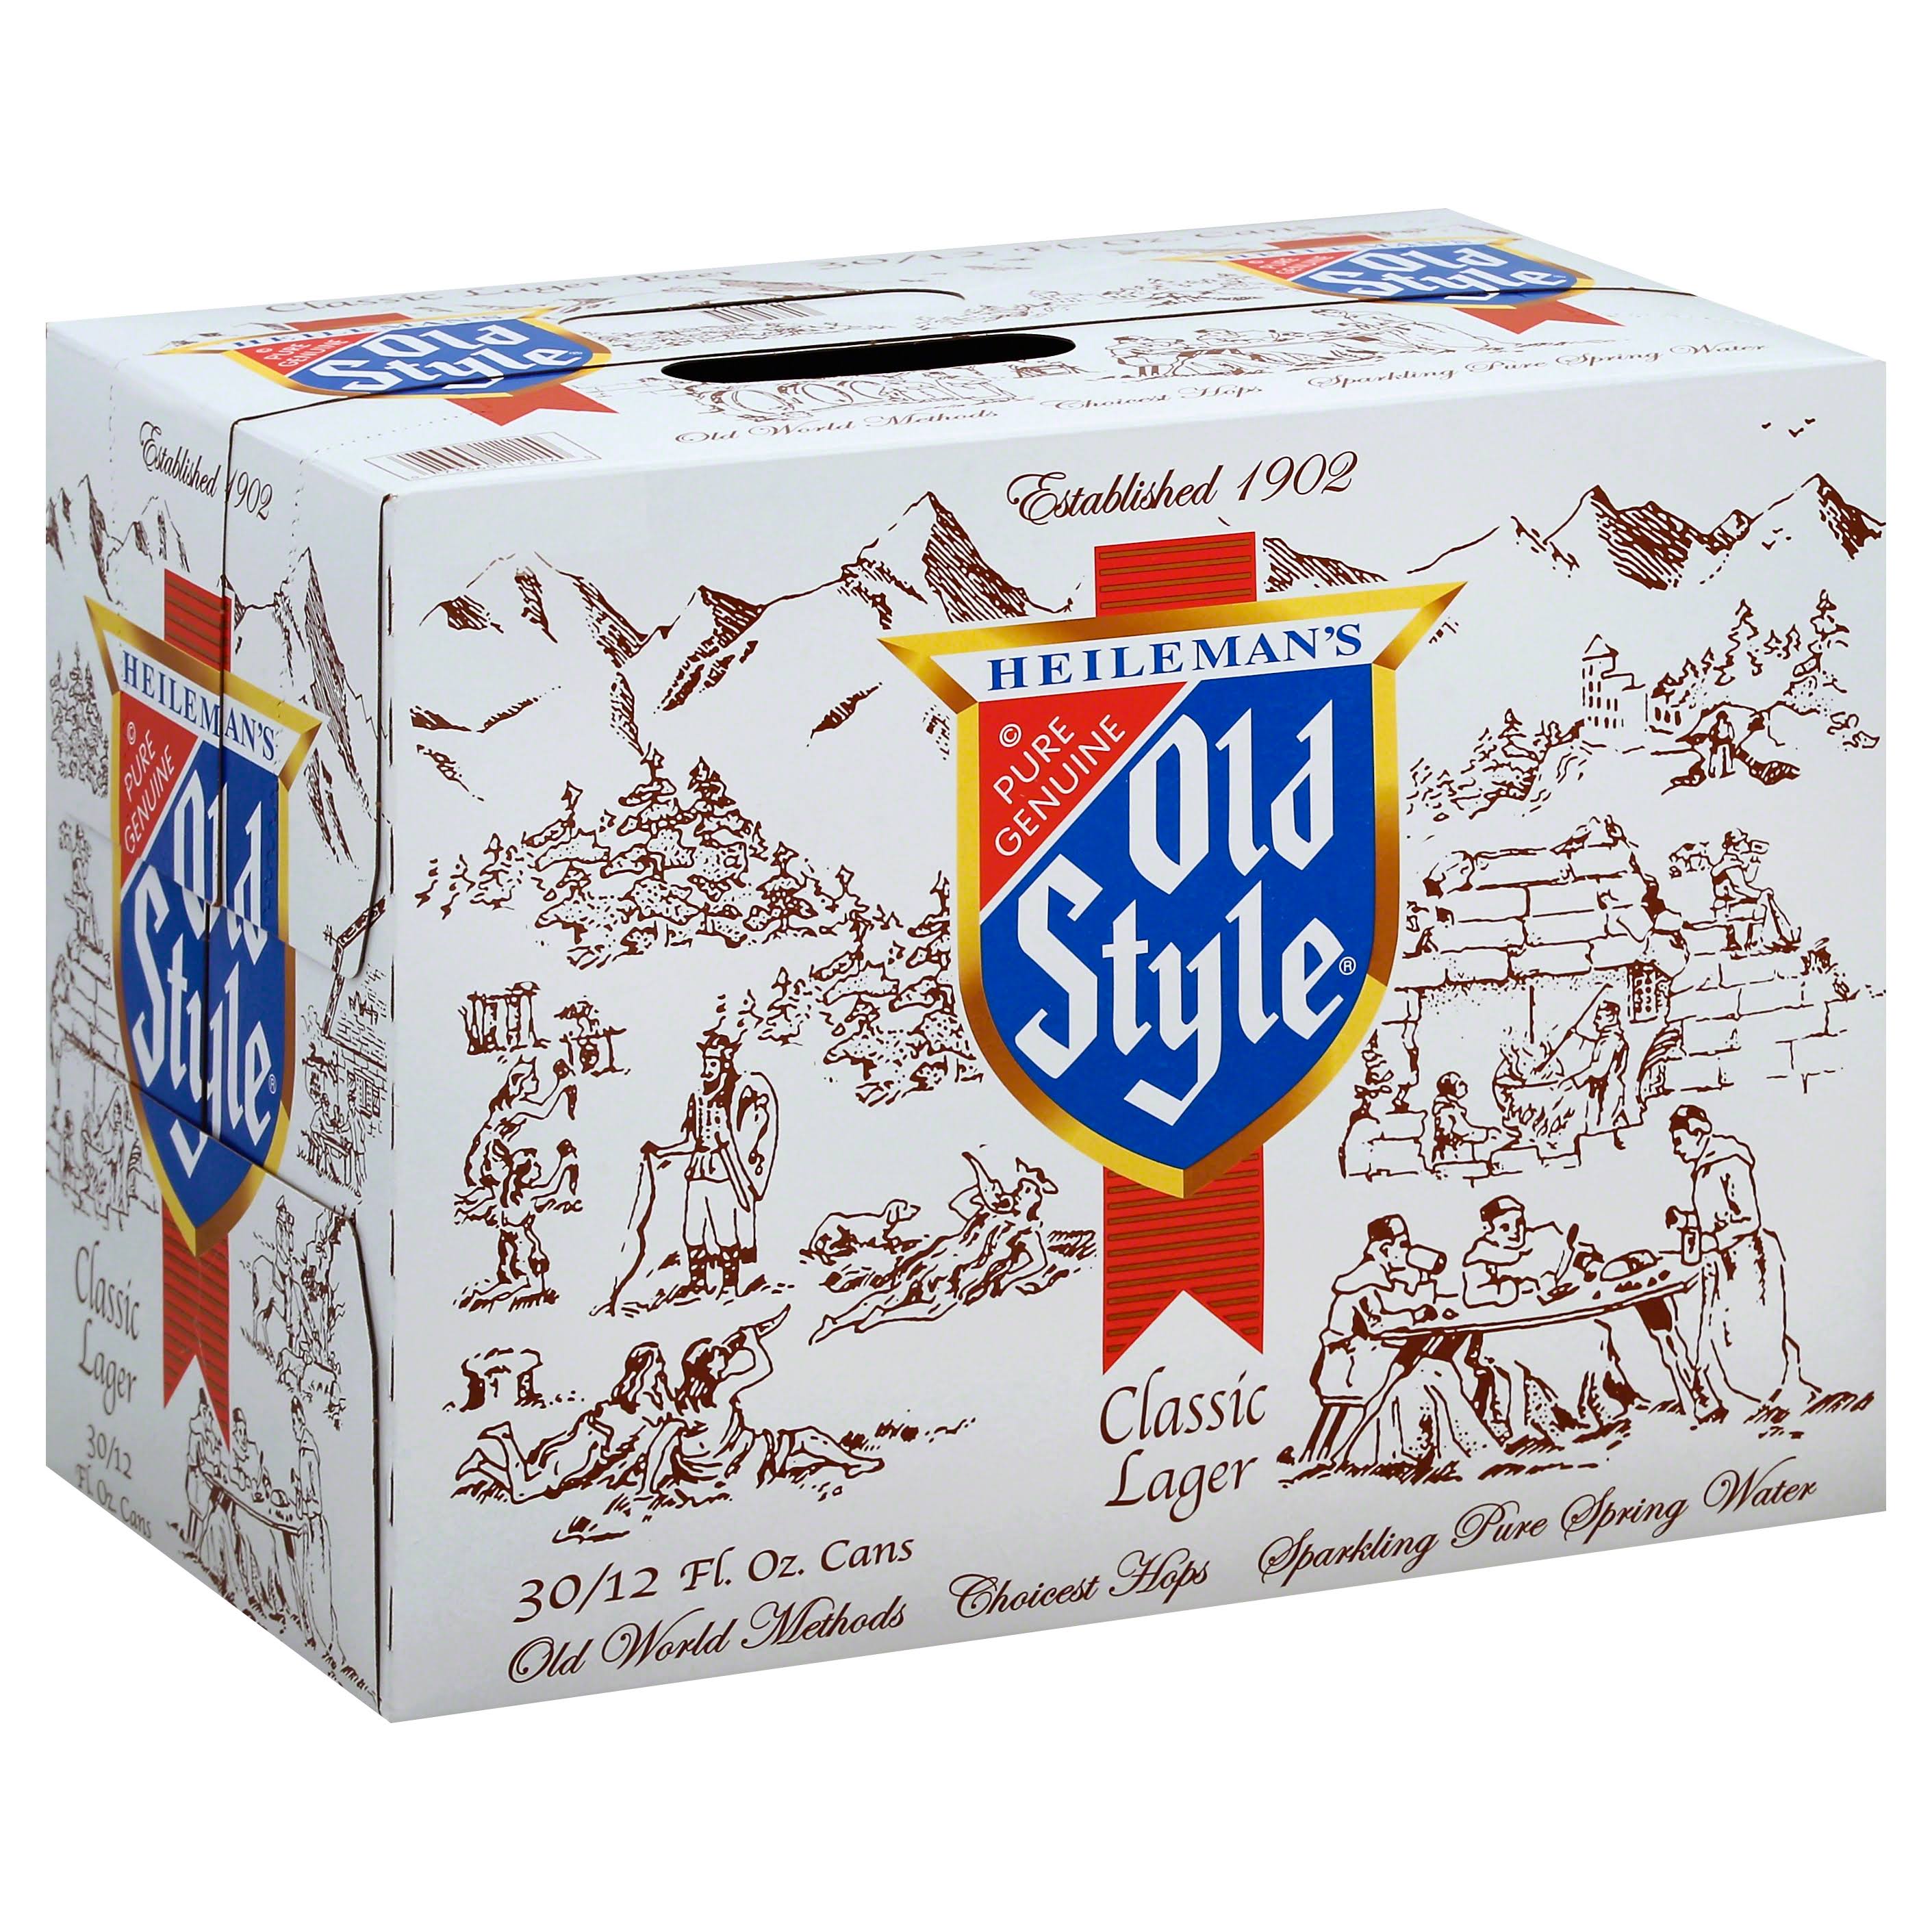 Old Style Beer, Classic Lager - 30 pack, 12 fl oz cans